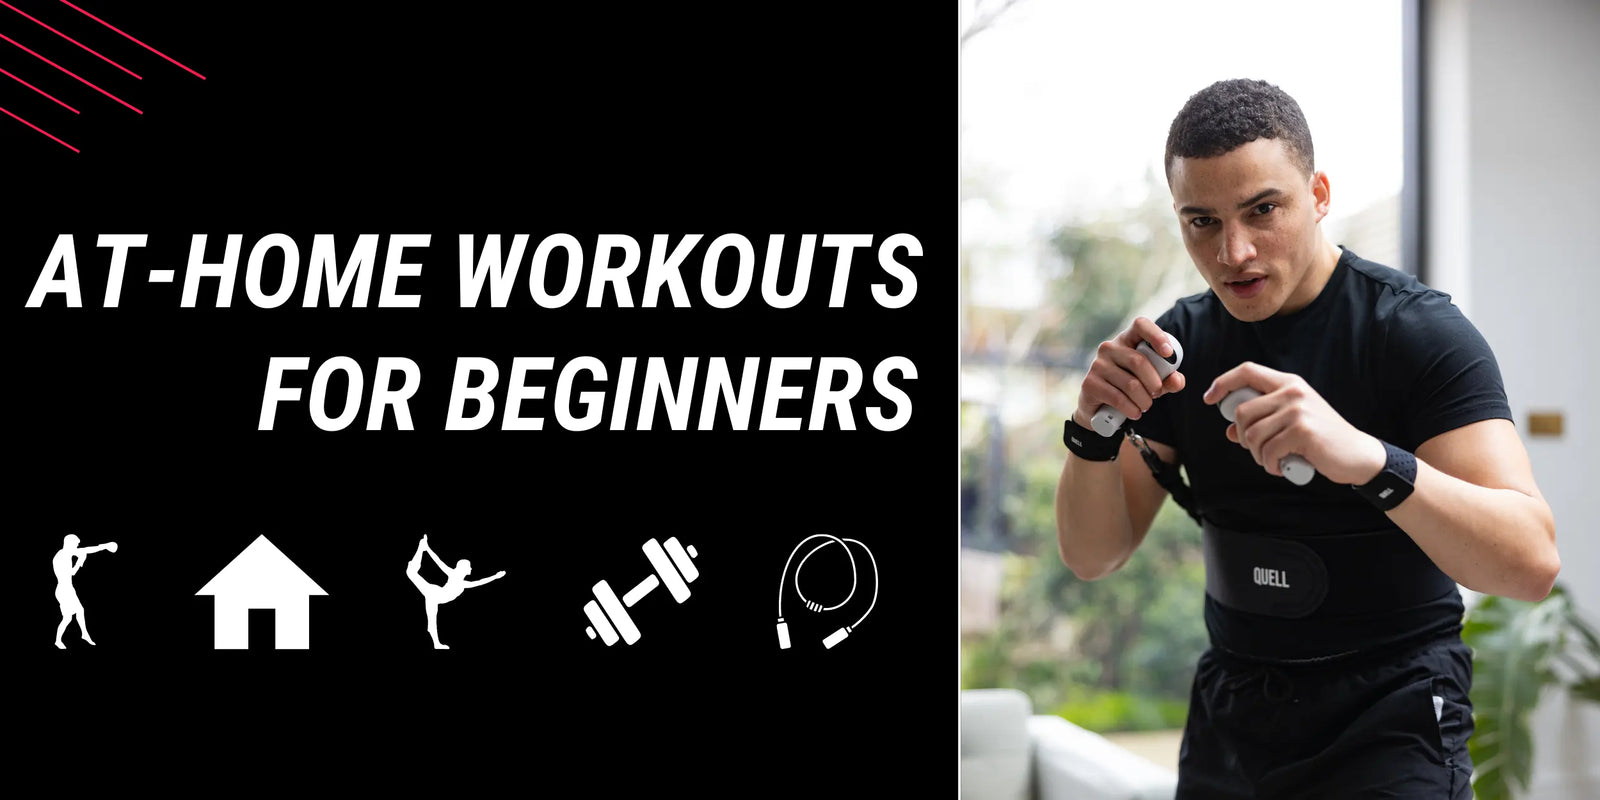 TOP 5 BEGINNER WORKOUT OPTIONS FOR AT-HOME FITNESS